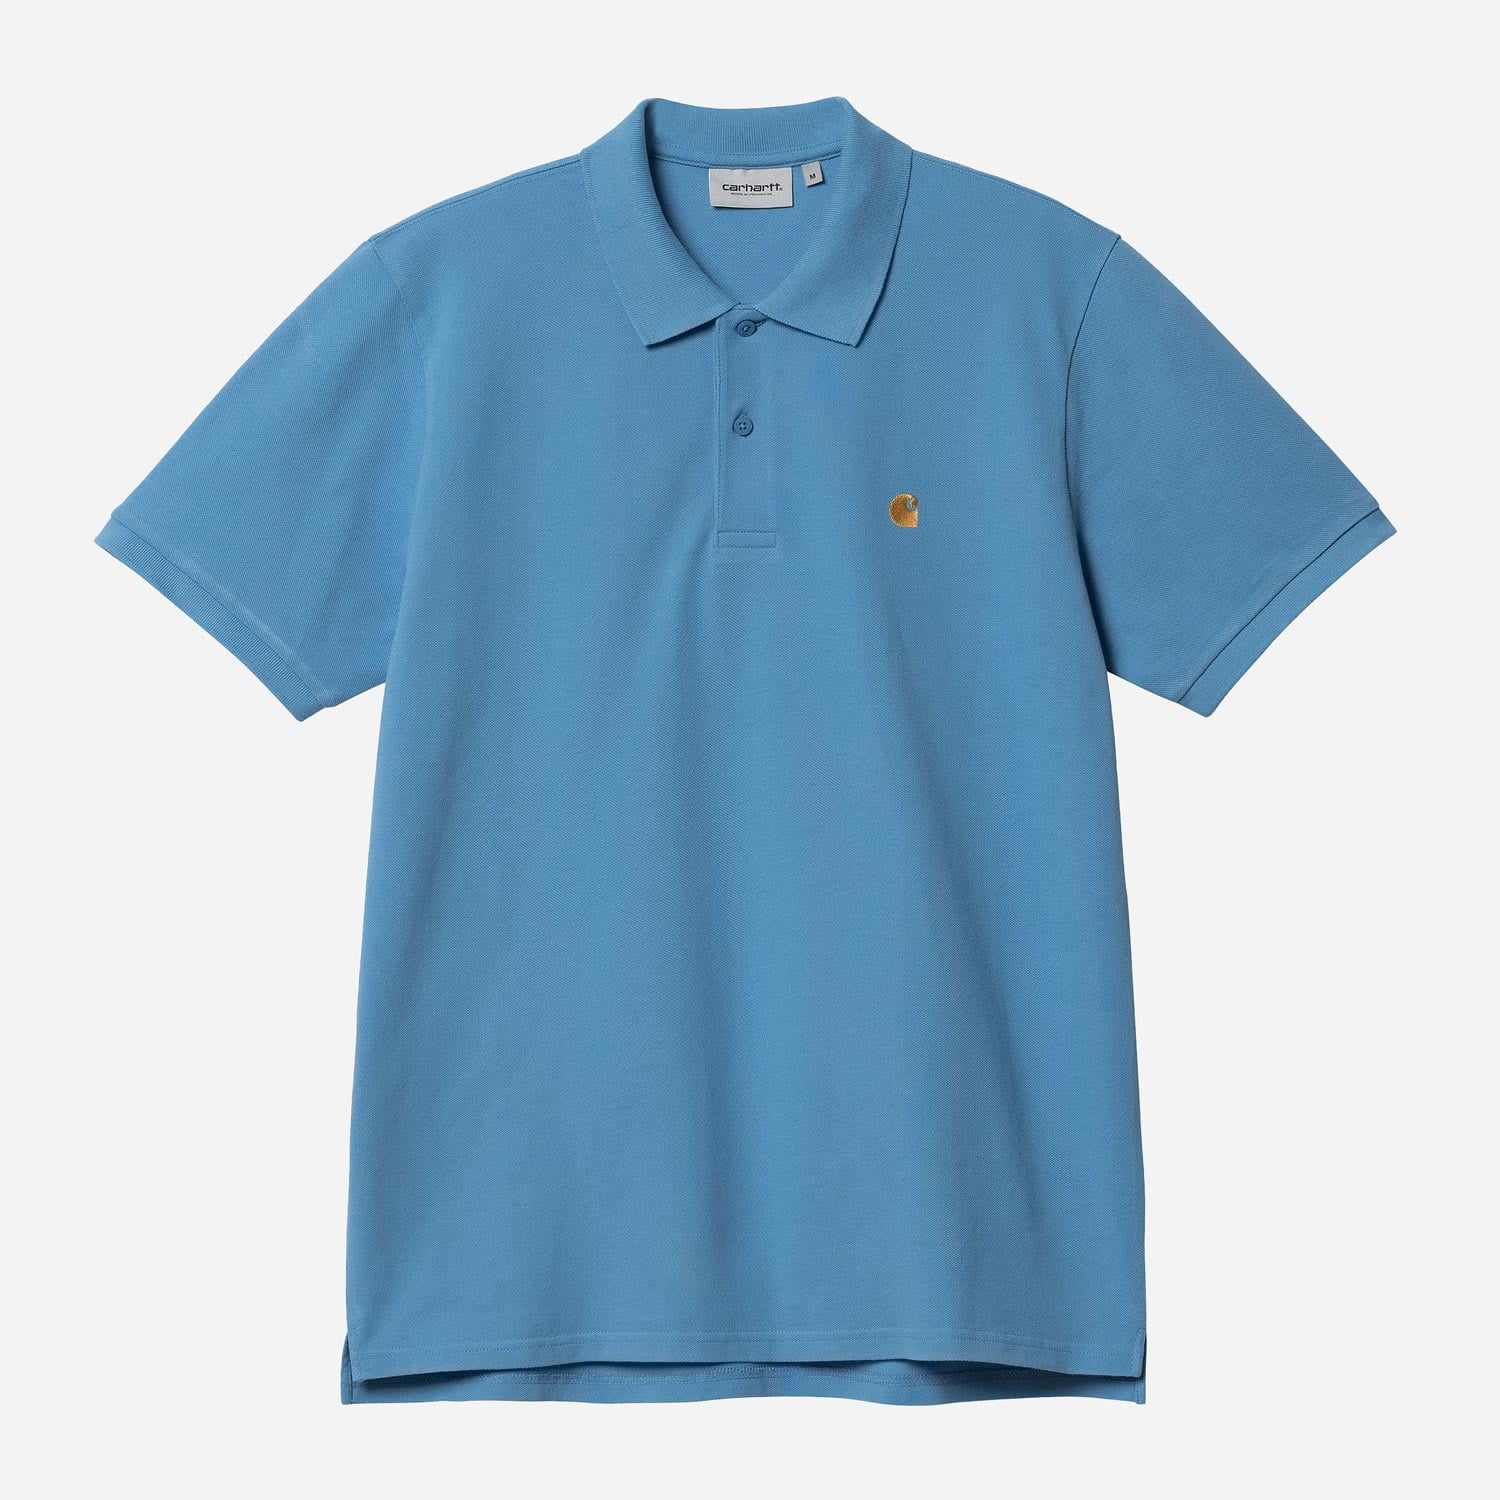 Carhartt WIP Chase Loose Fit Short Sleeve Polo - Piscine/Gold